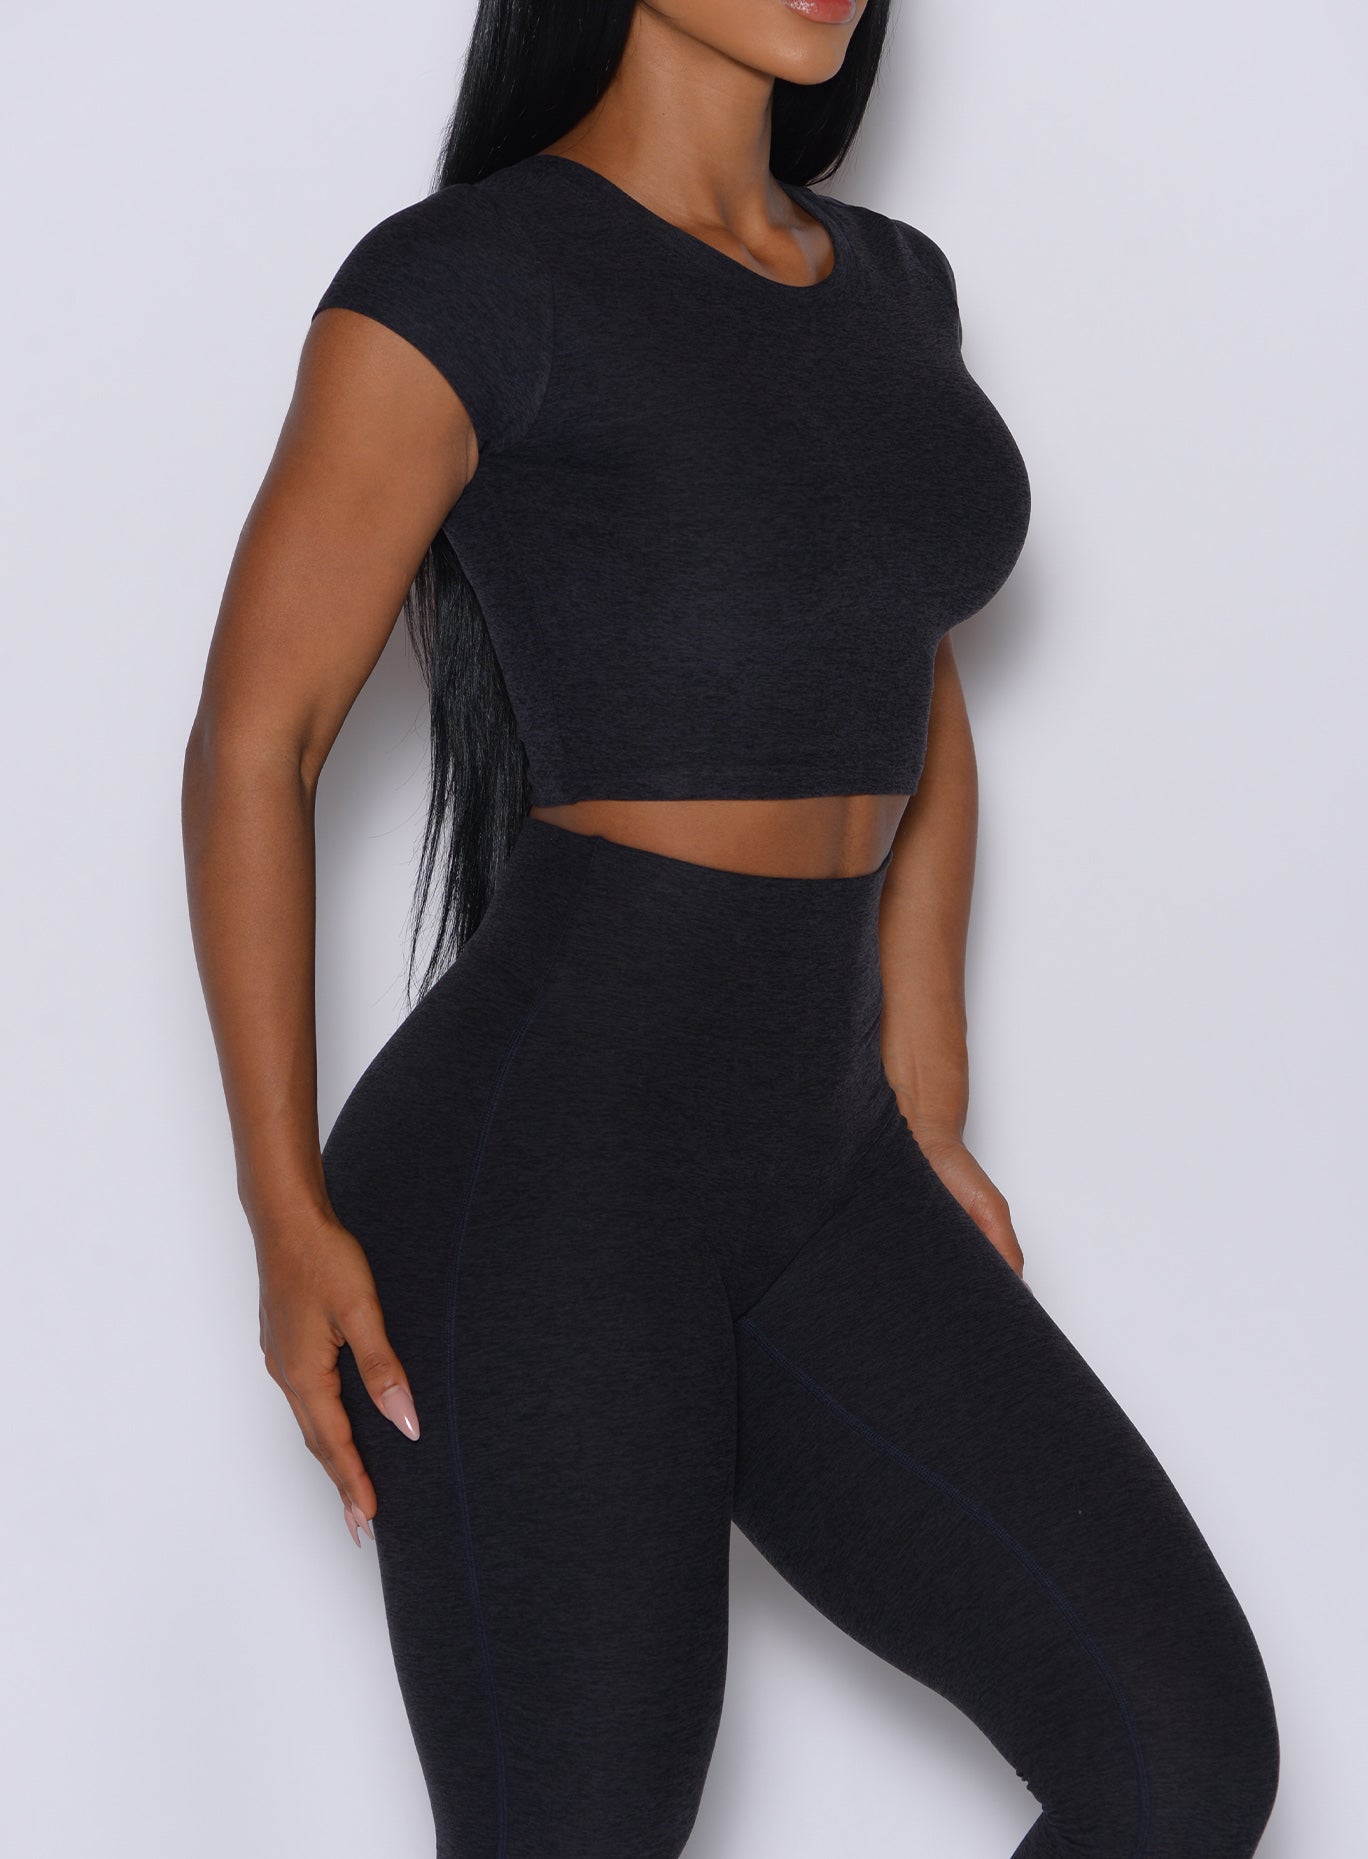 Right side close up view of a model facing to her right wearing our Fit Fam Active Tee in Onyx color along with the matching Leggings